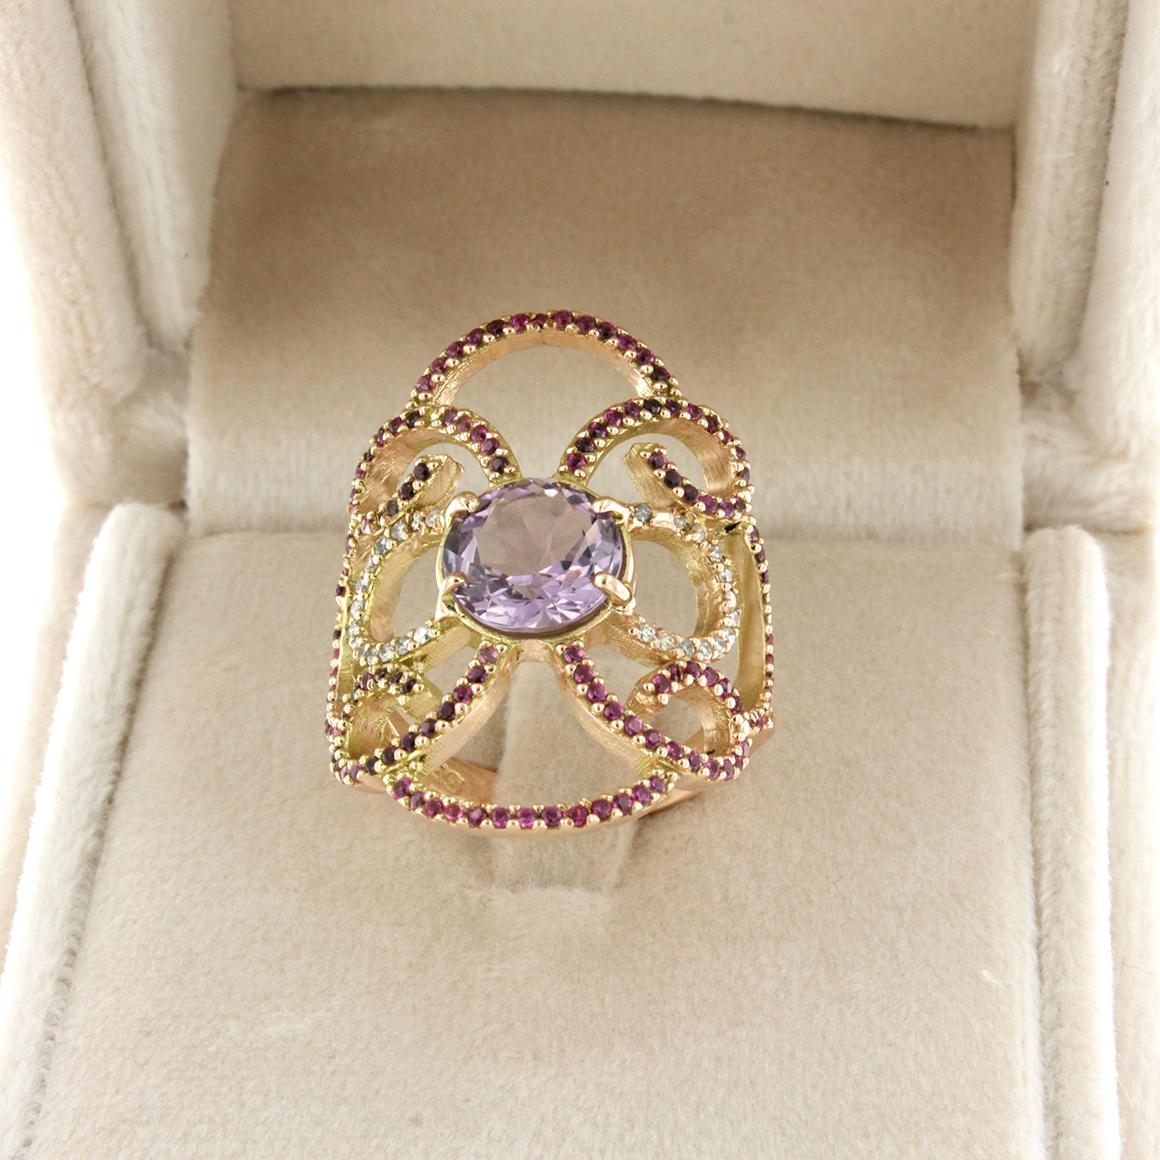 Ring with a refined and unique manufacture. Made in Italy by expert hands.
earrings in rose gold 14kt g.8.80    Stones: round cut , Amethyst, white diamonds cts 0.28  and Ruby. 
Size of ring:  EU 20 - 60   USA 9  
(Possibility to have  earrings  in